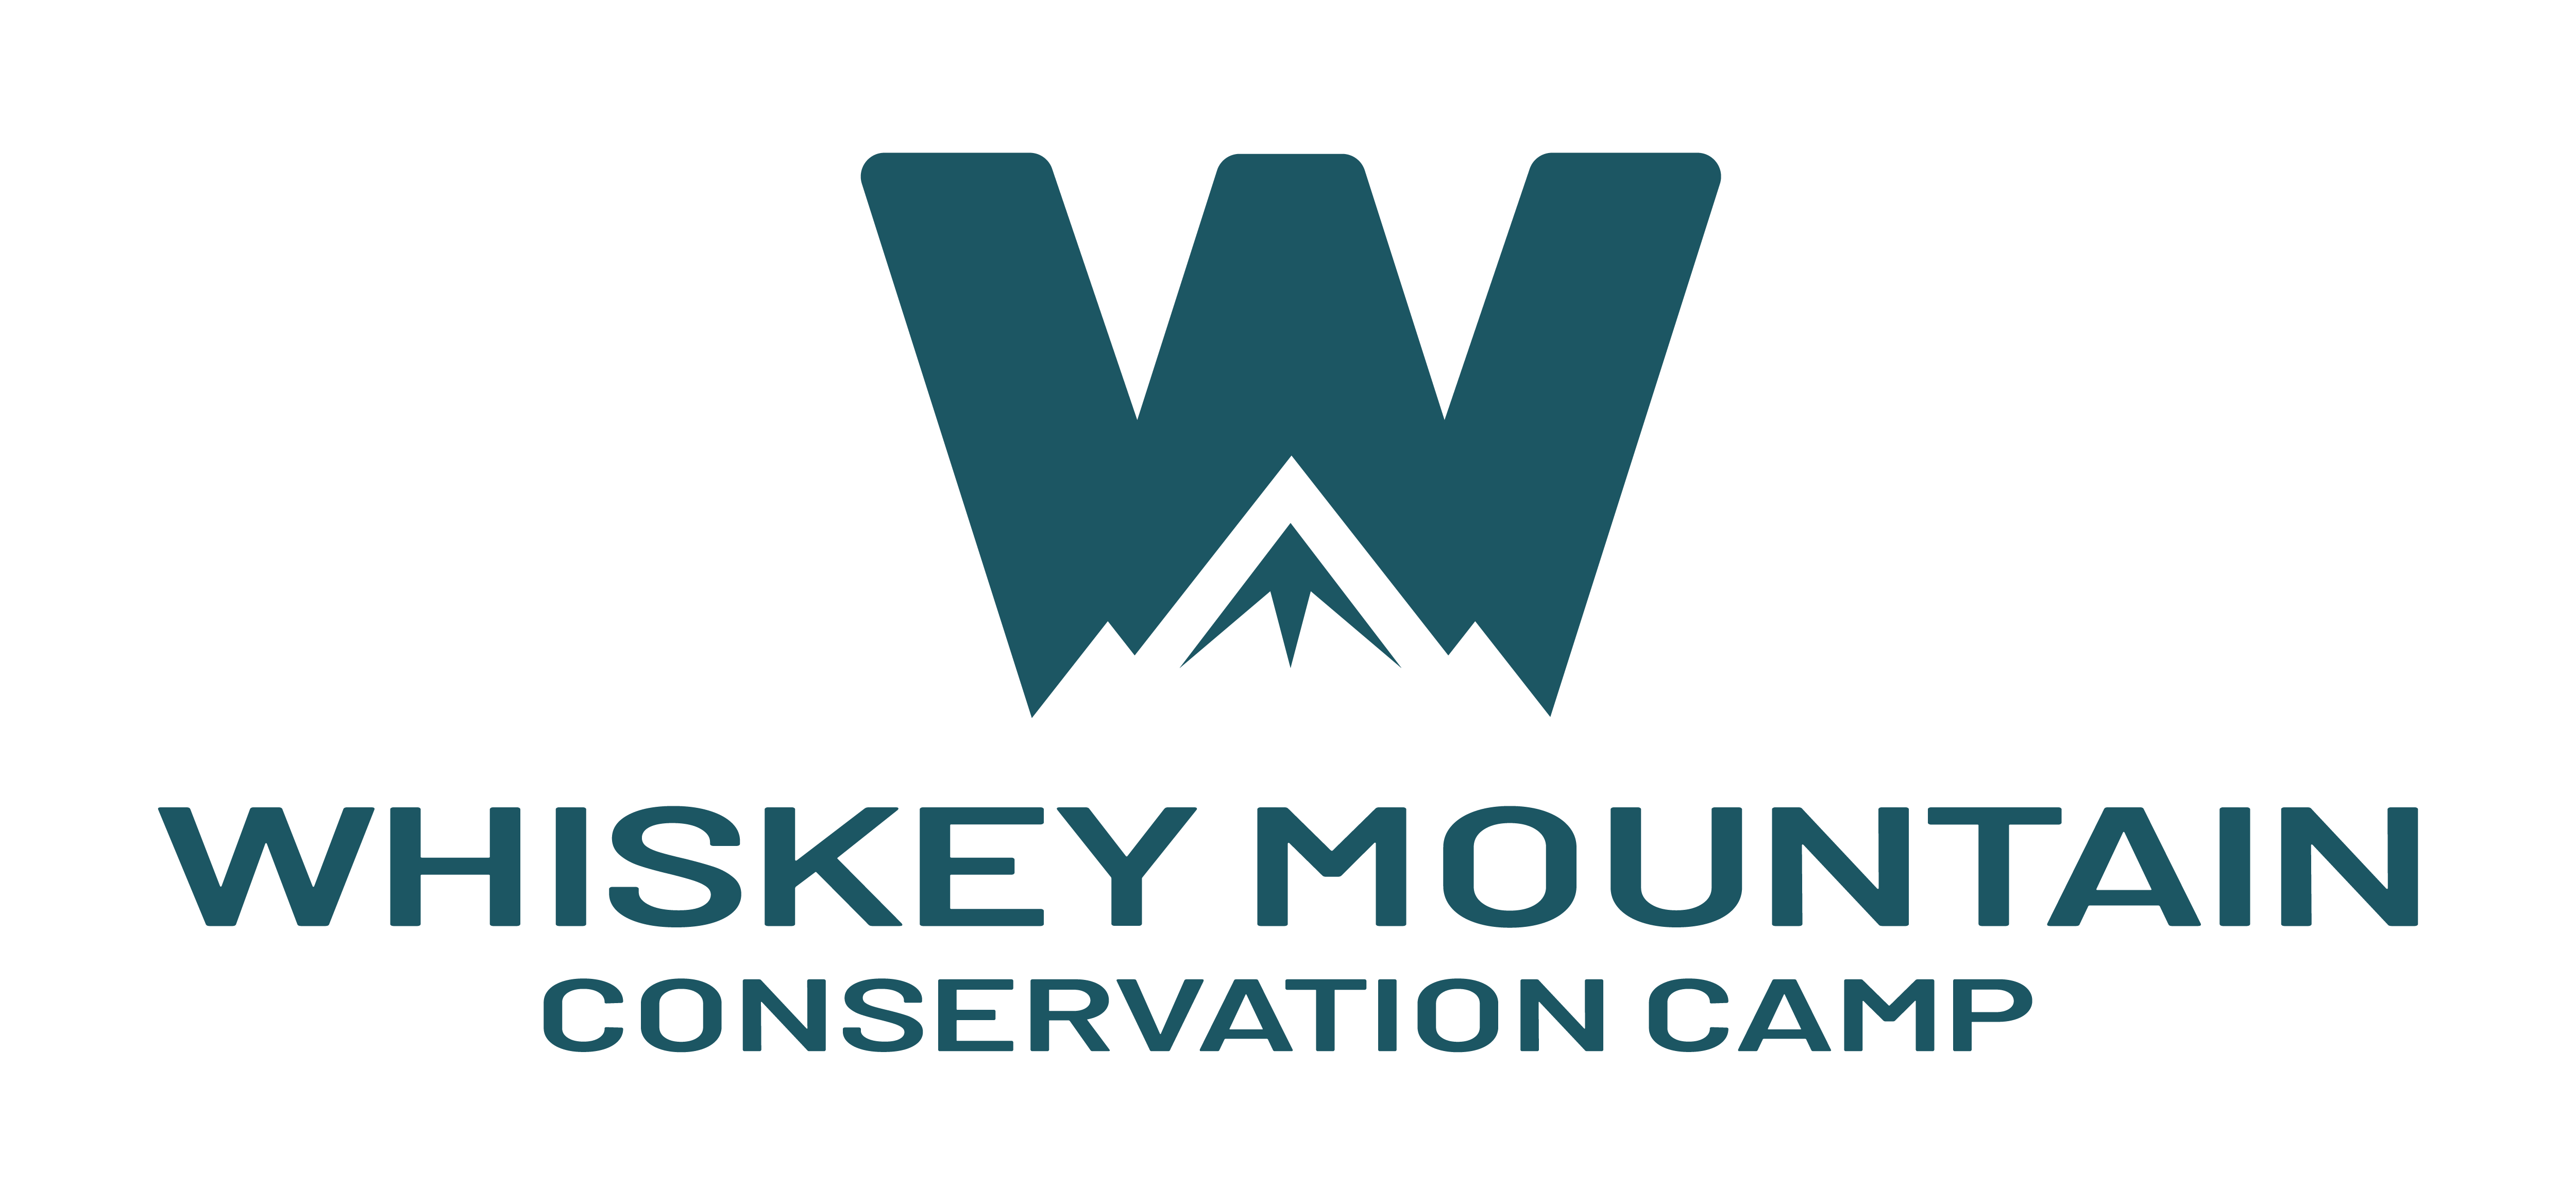 Whiskey Mountain Conservation Camp Logo